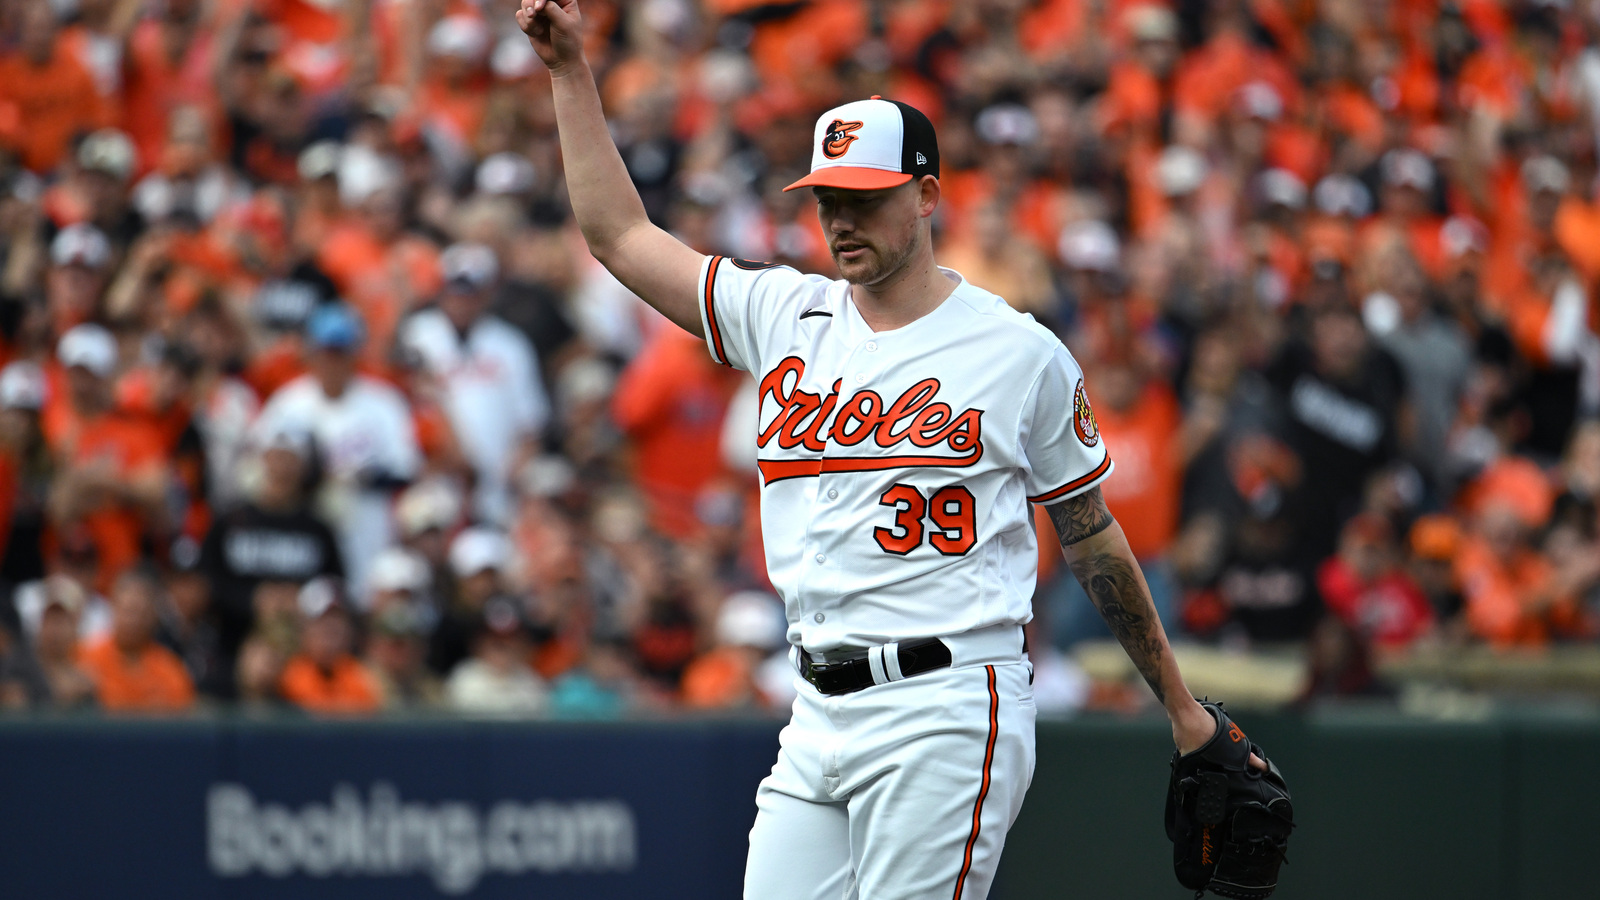 Orioles injury news puts rotation in precarious situation